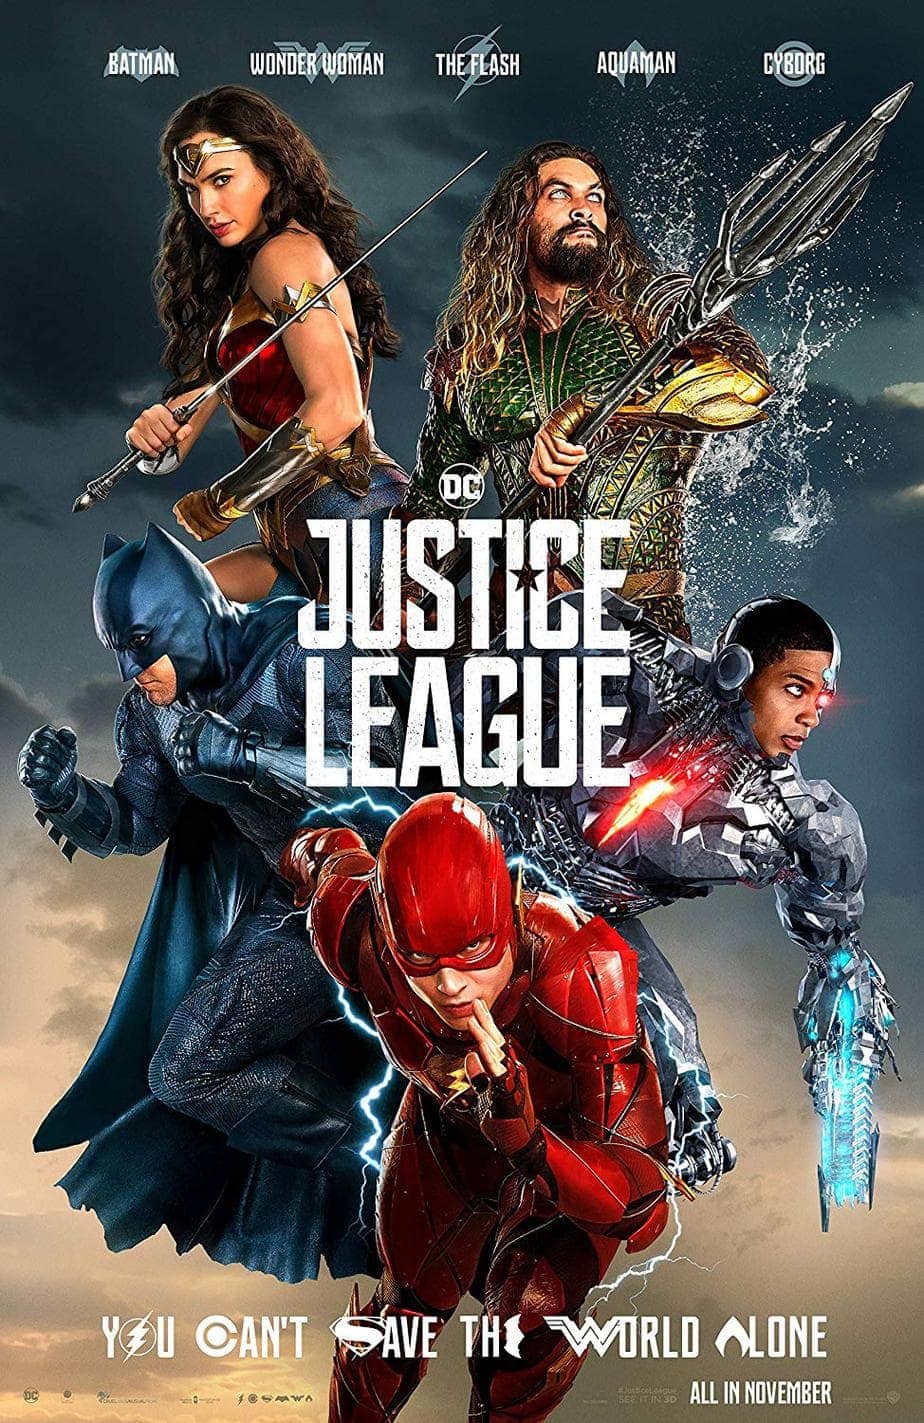 After a Day Uploaded Justice League Trailer Surpassed 11 Million View at YouTube 1